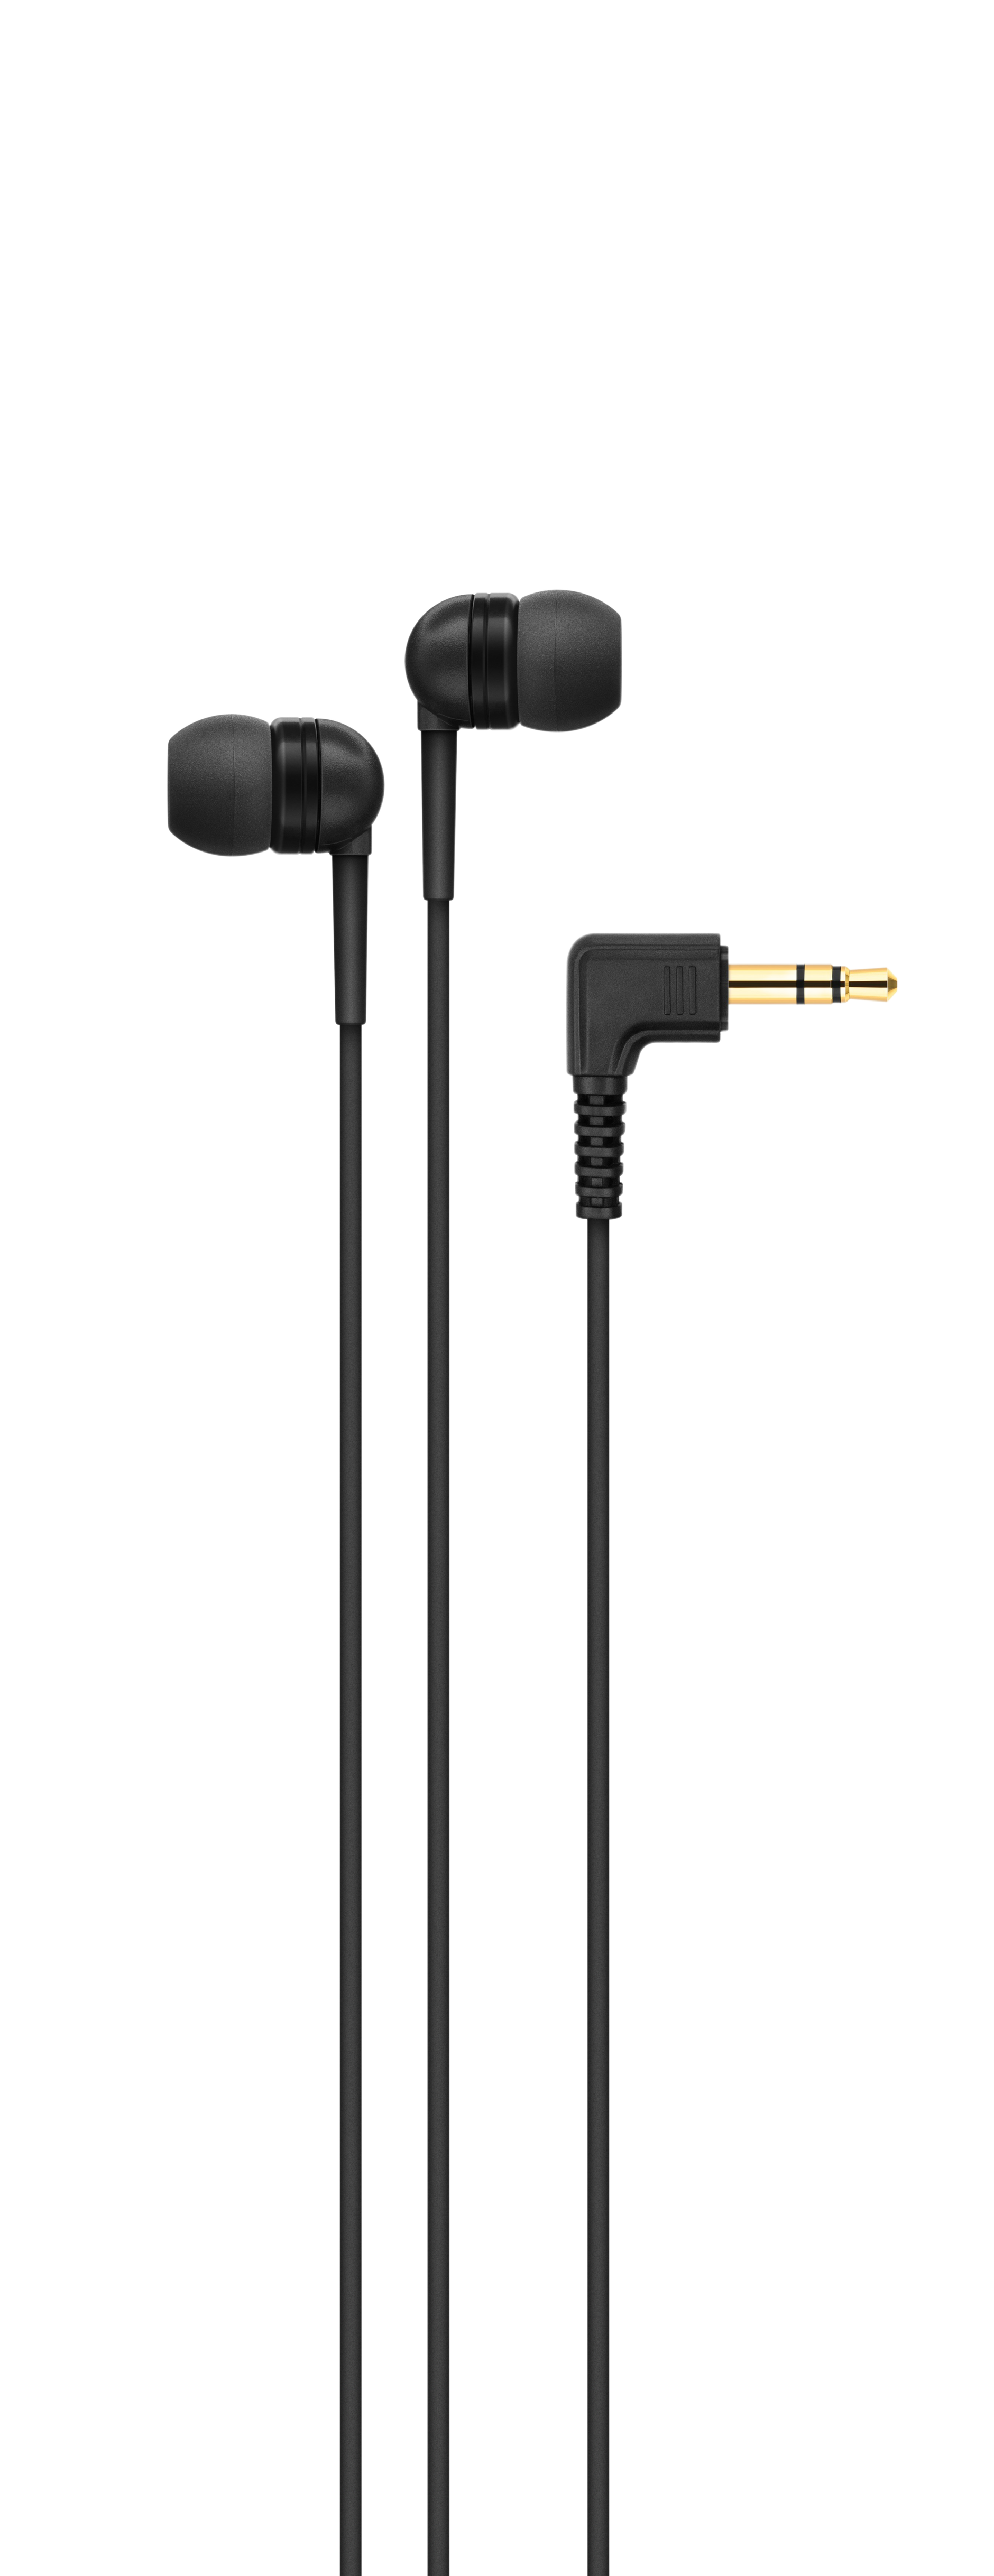 IE_4_In_Ear_Headphones_Product_shot_cutout.png